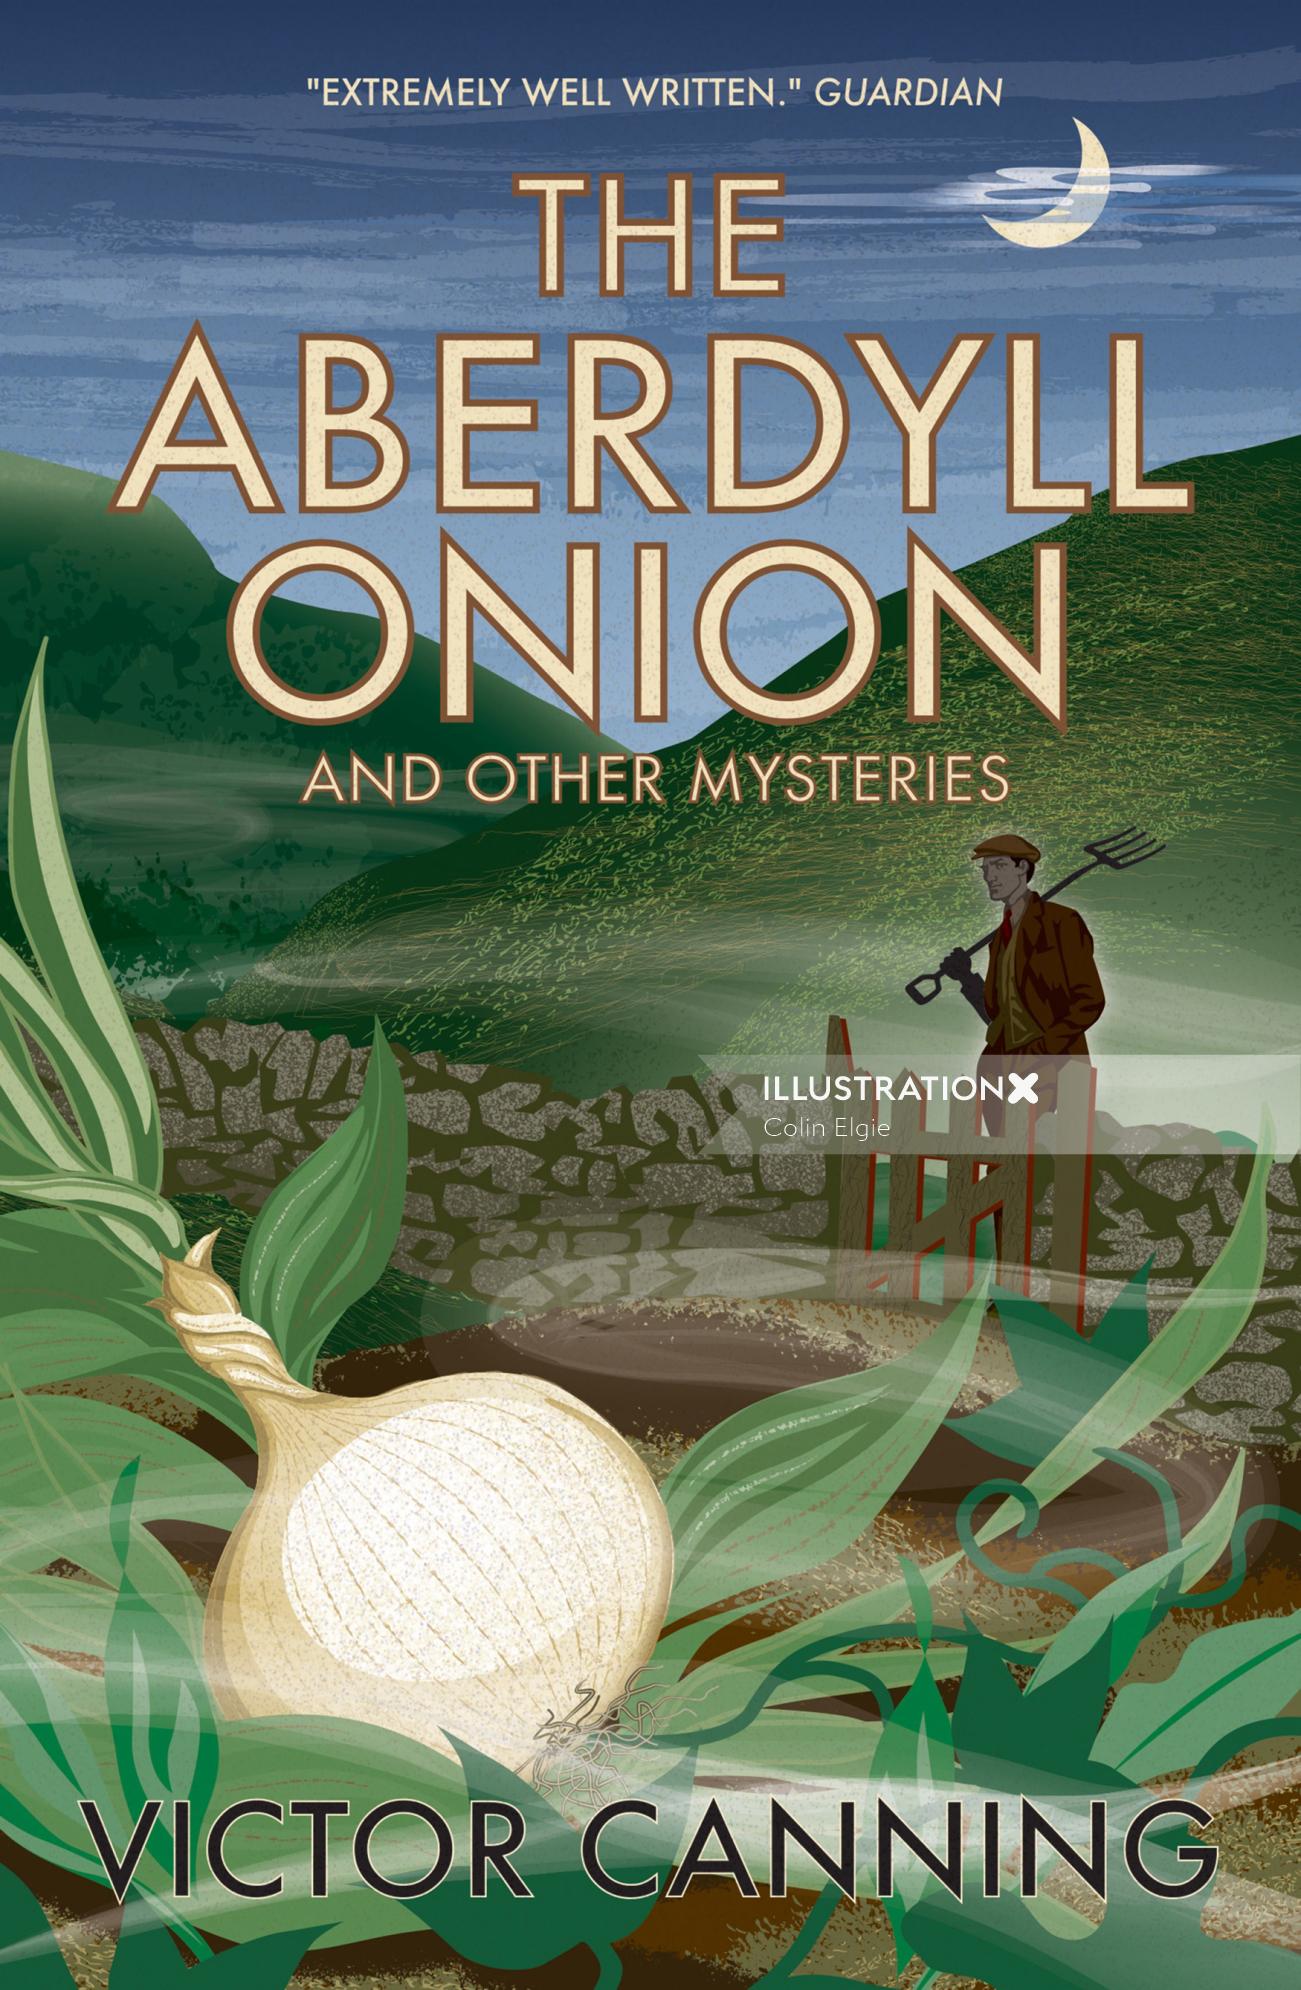 "The Aberdyll Onion" book jacket by Colin Elgie